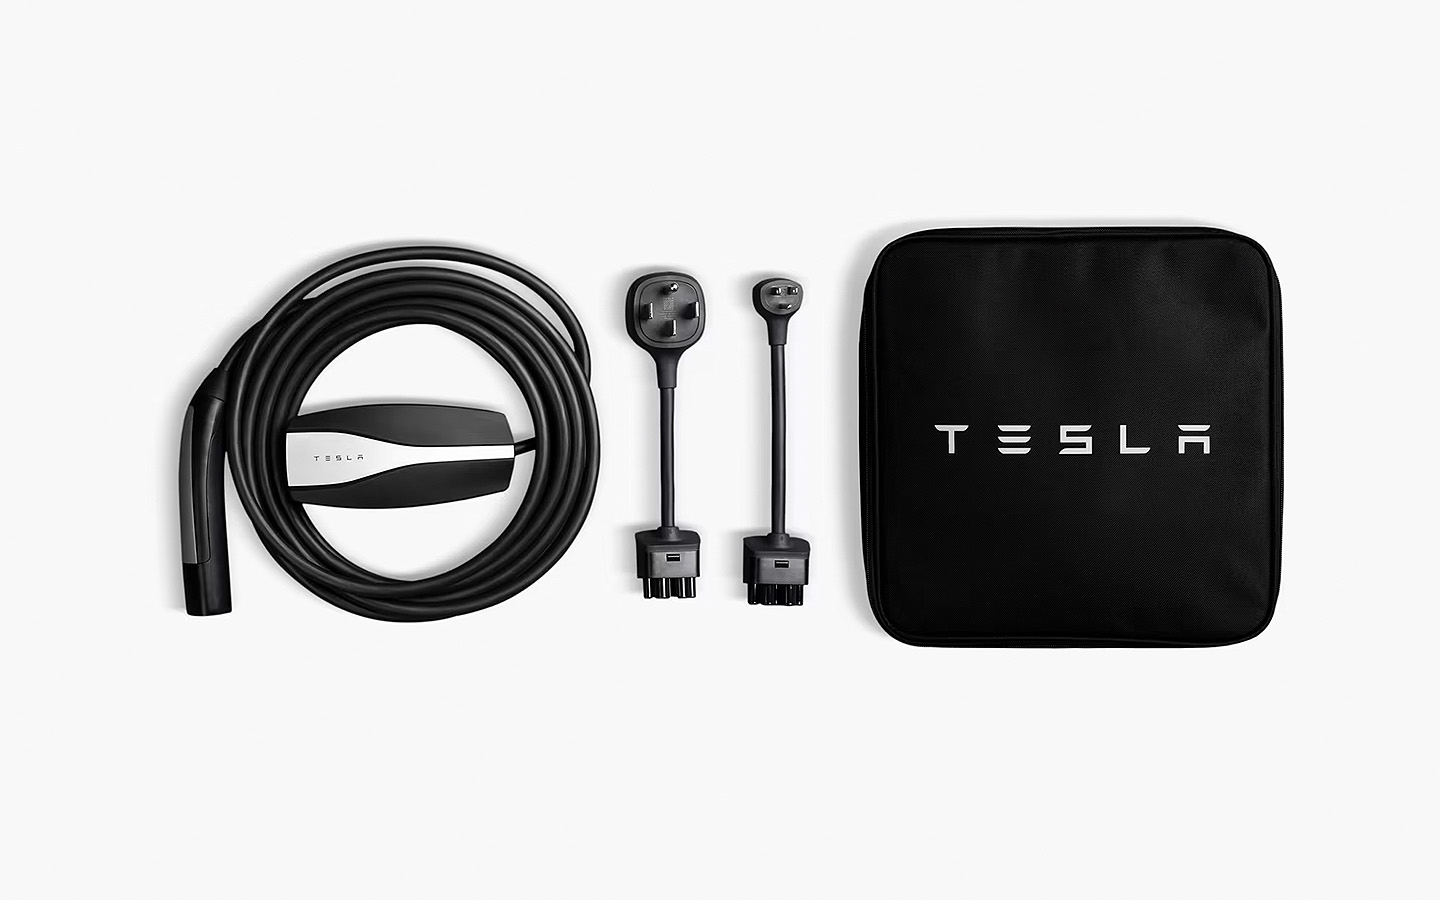 Tesla Wall Connector vs Mobile Connector comparison shows the pros and cons of both